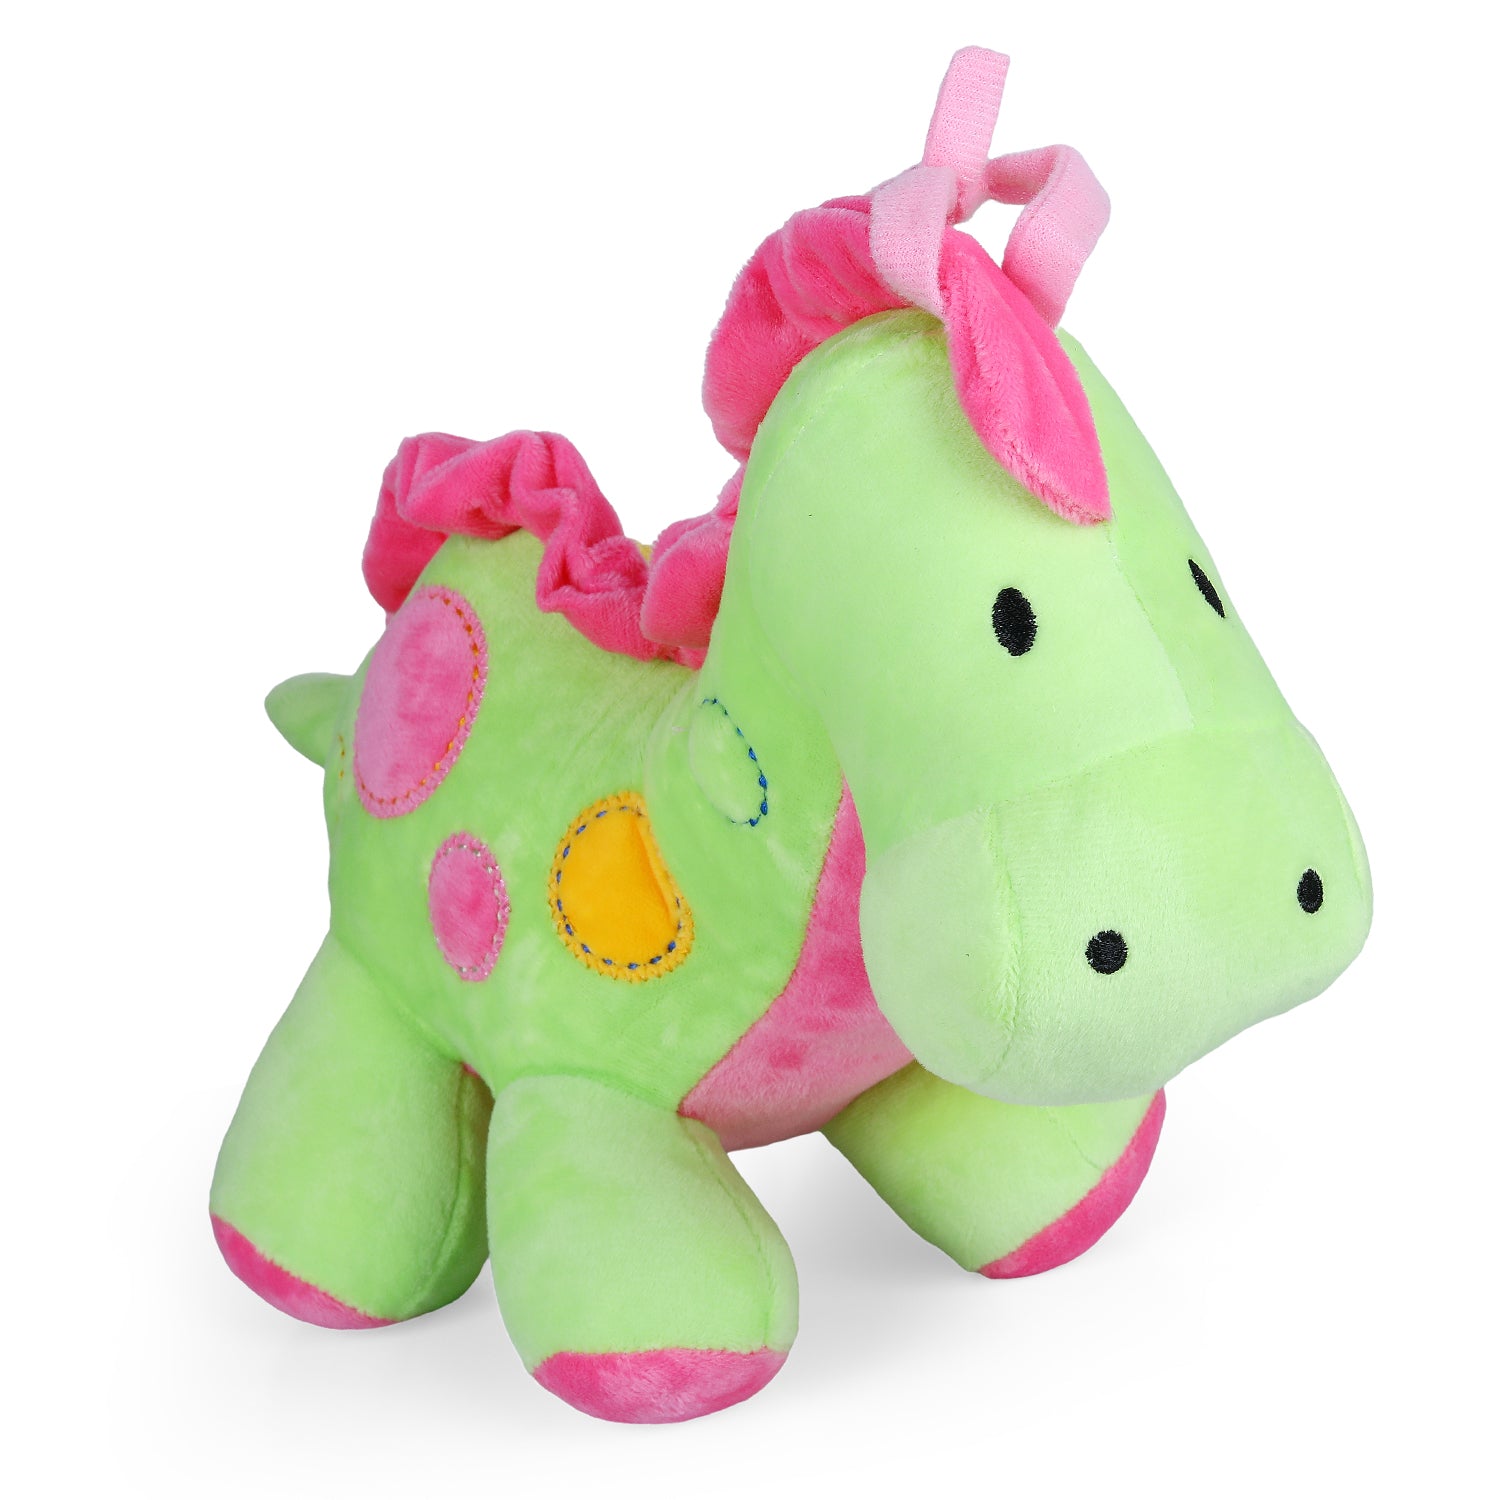 Dinosaur Bed Hanging Musical Pulling Toy - Green - Baby Moo